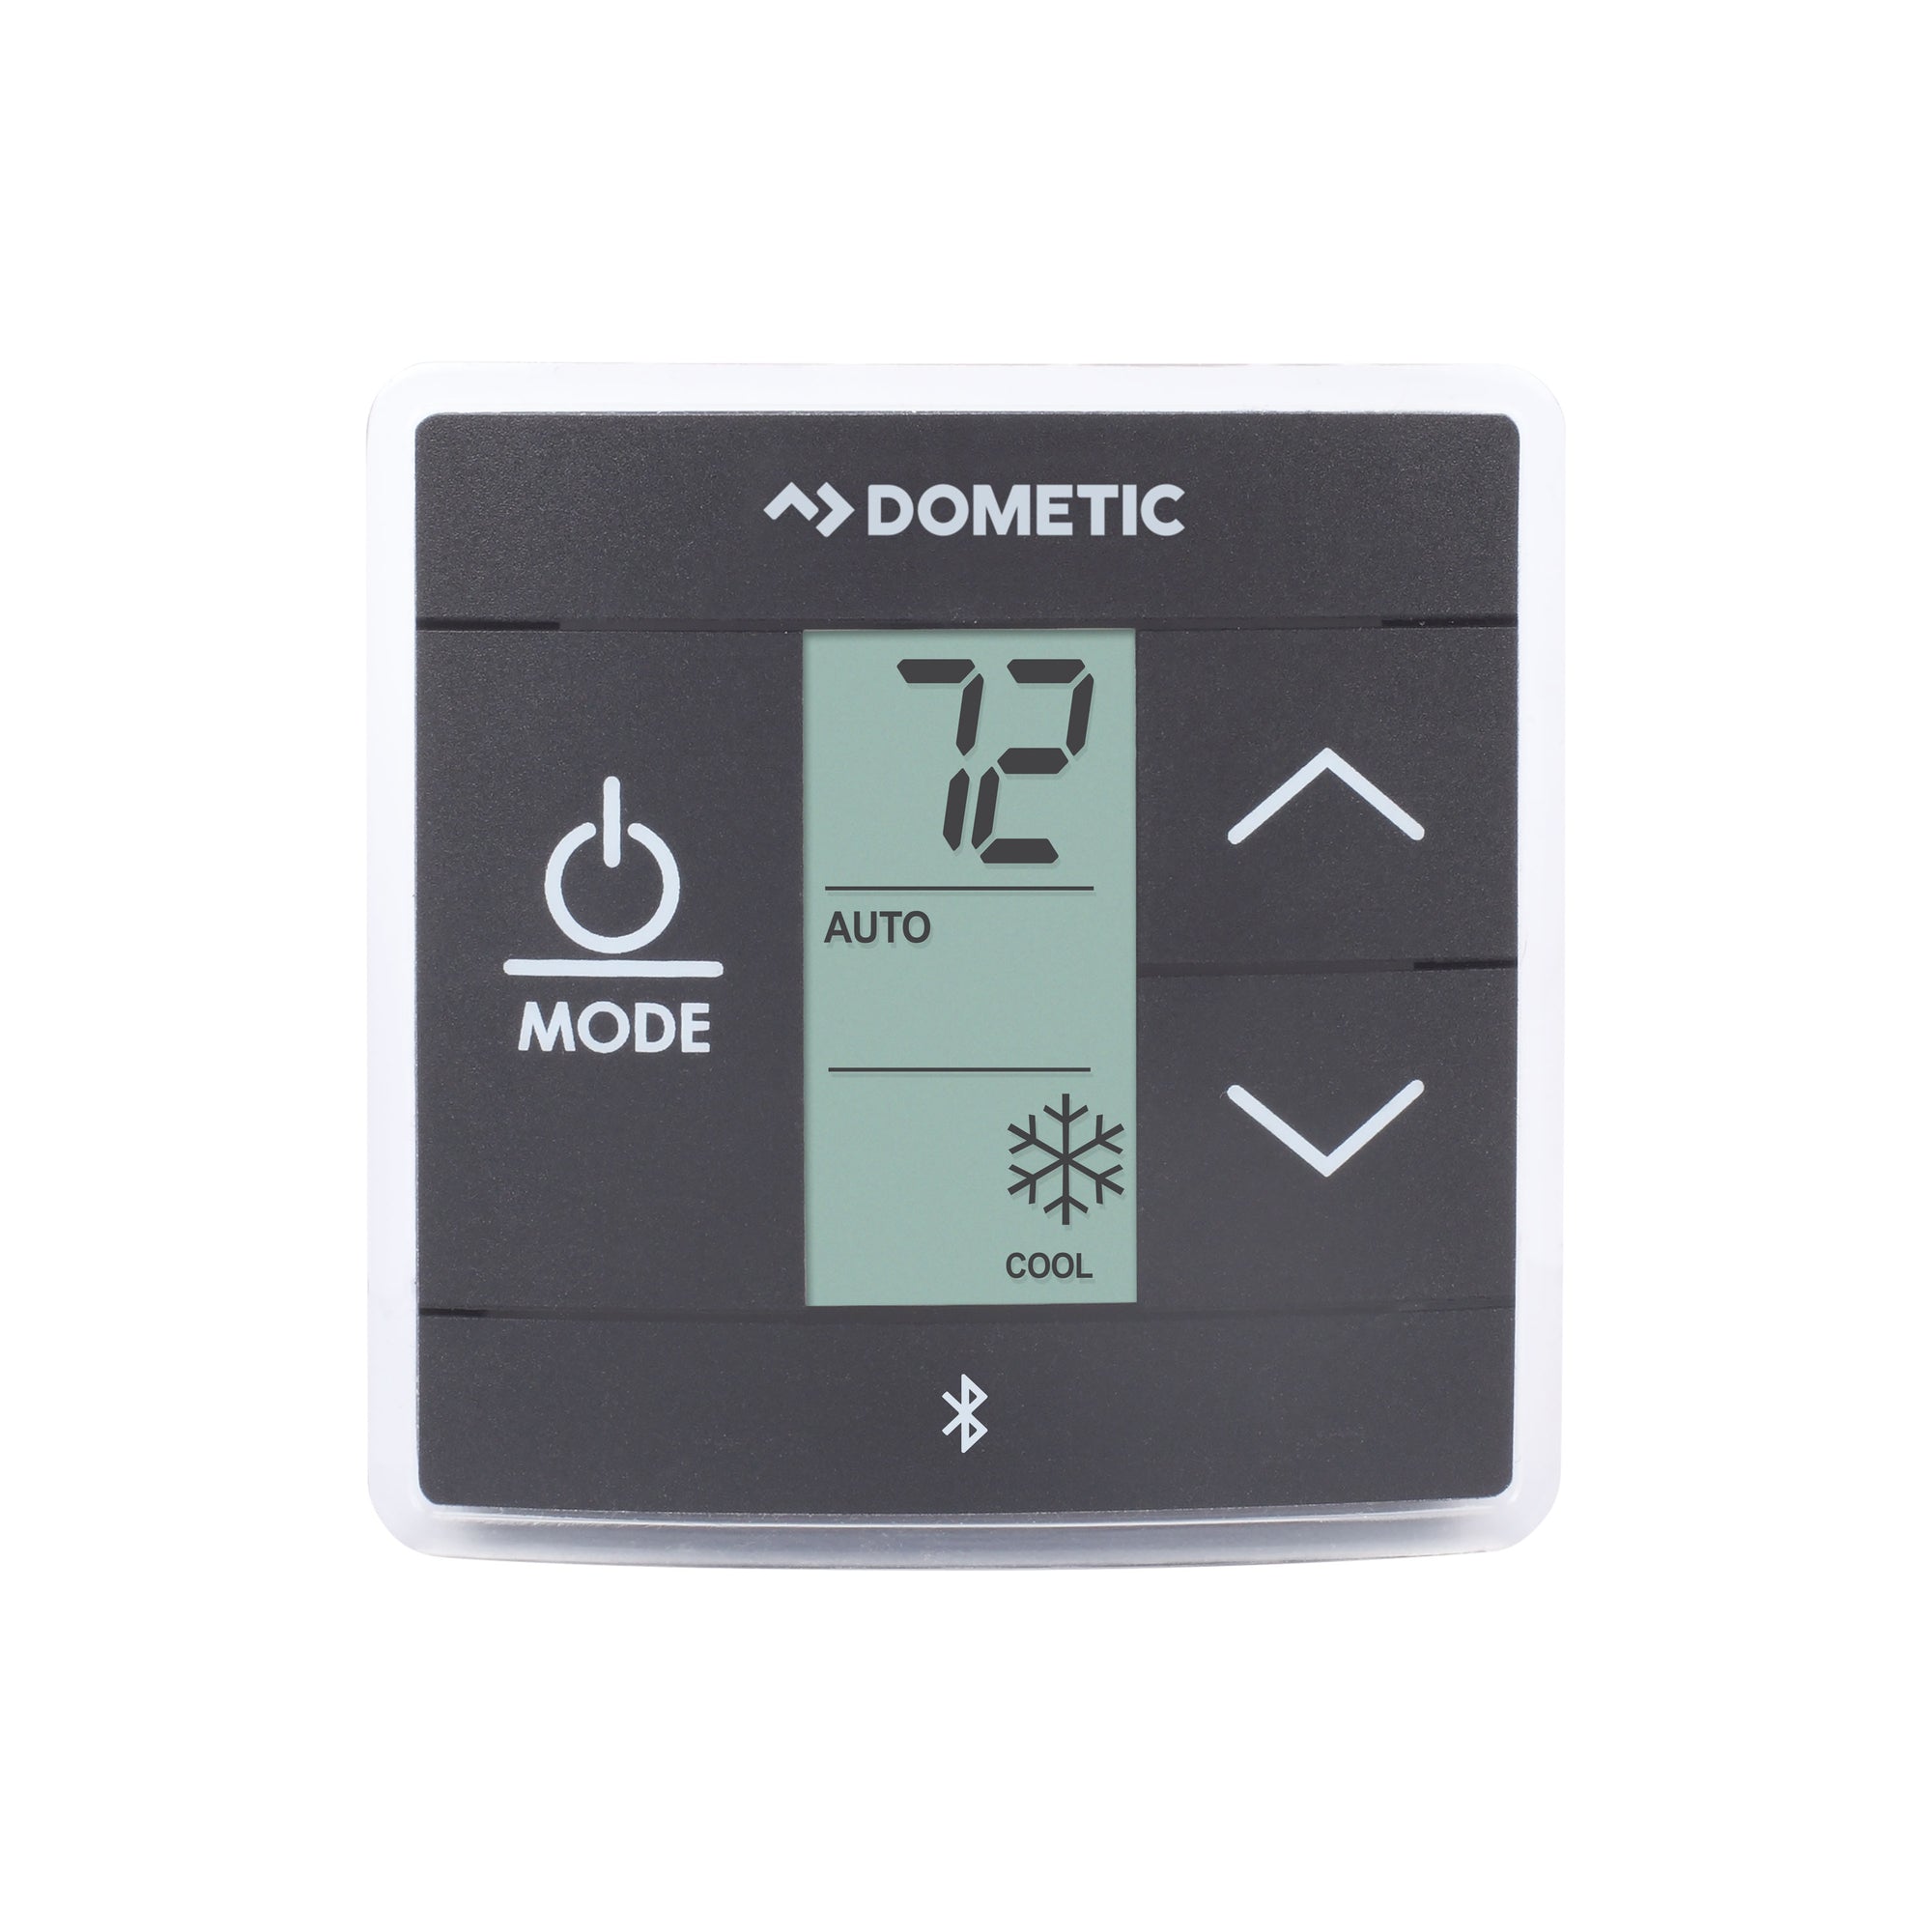 Dometic 3316400.013 Control Kit/Relay Box, Heat/Cool with Black Bluetooth CT Wall Thermostat